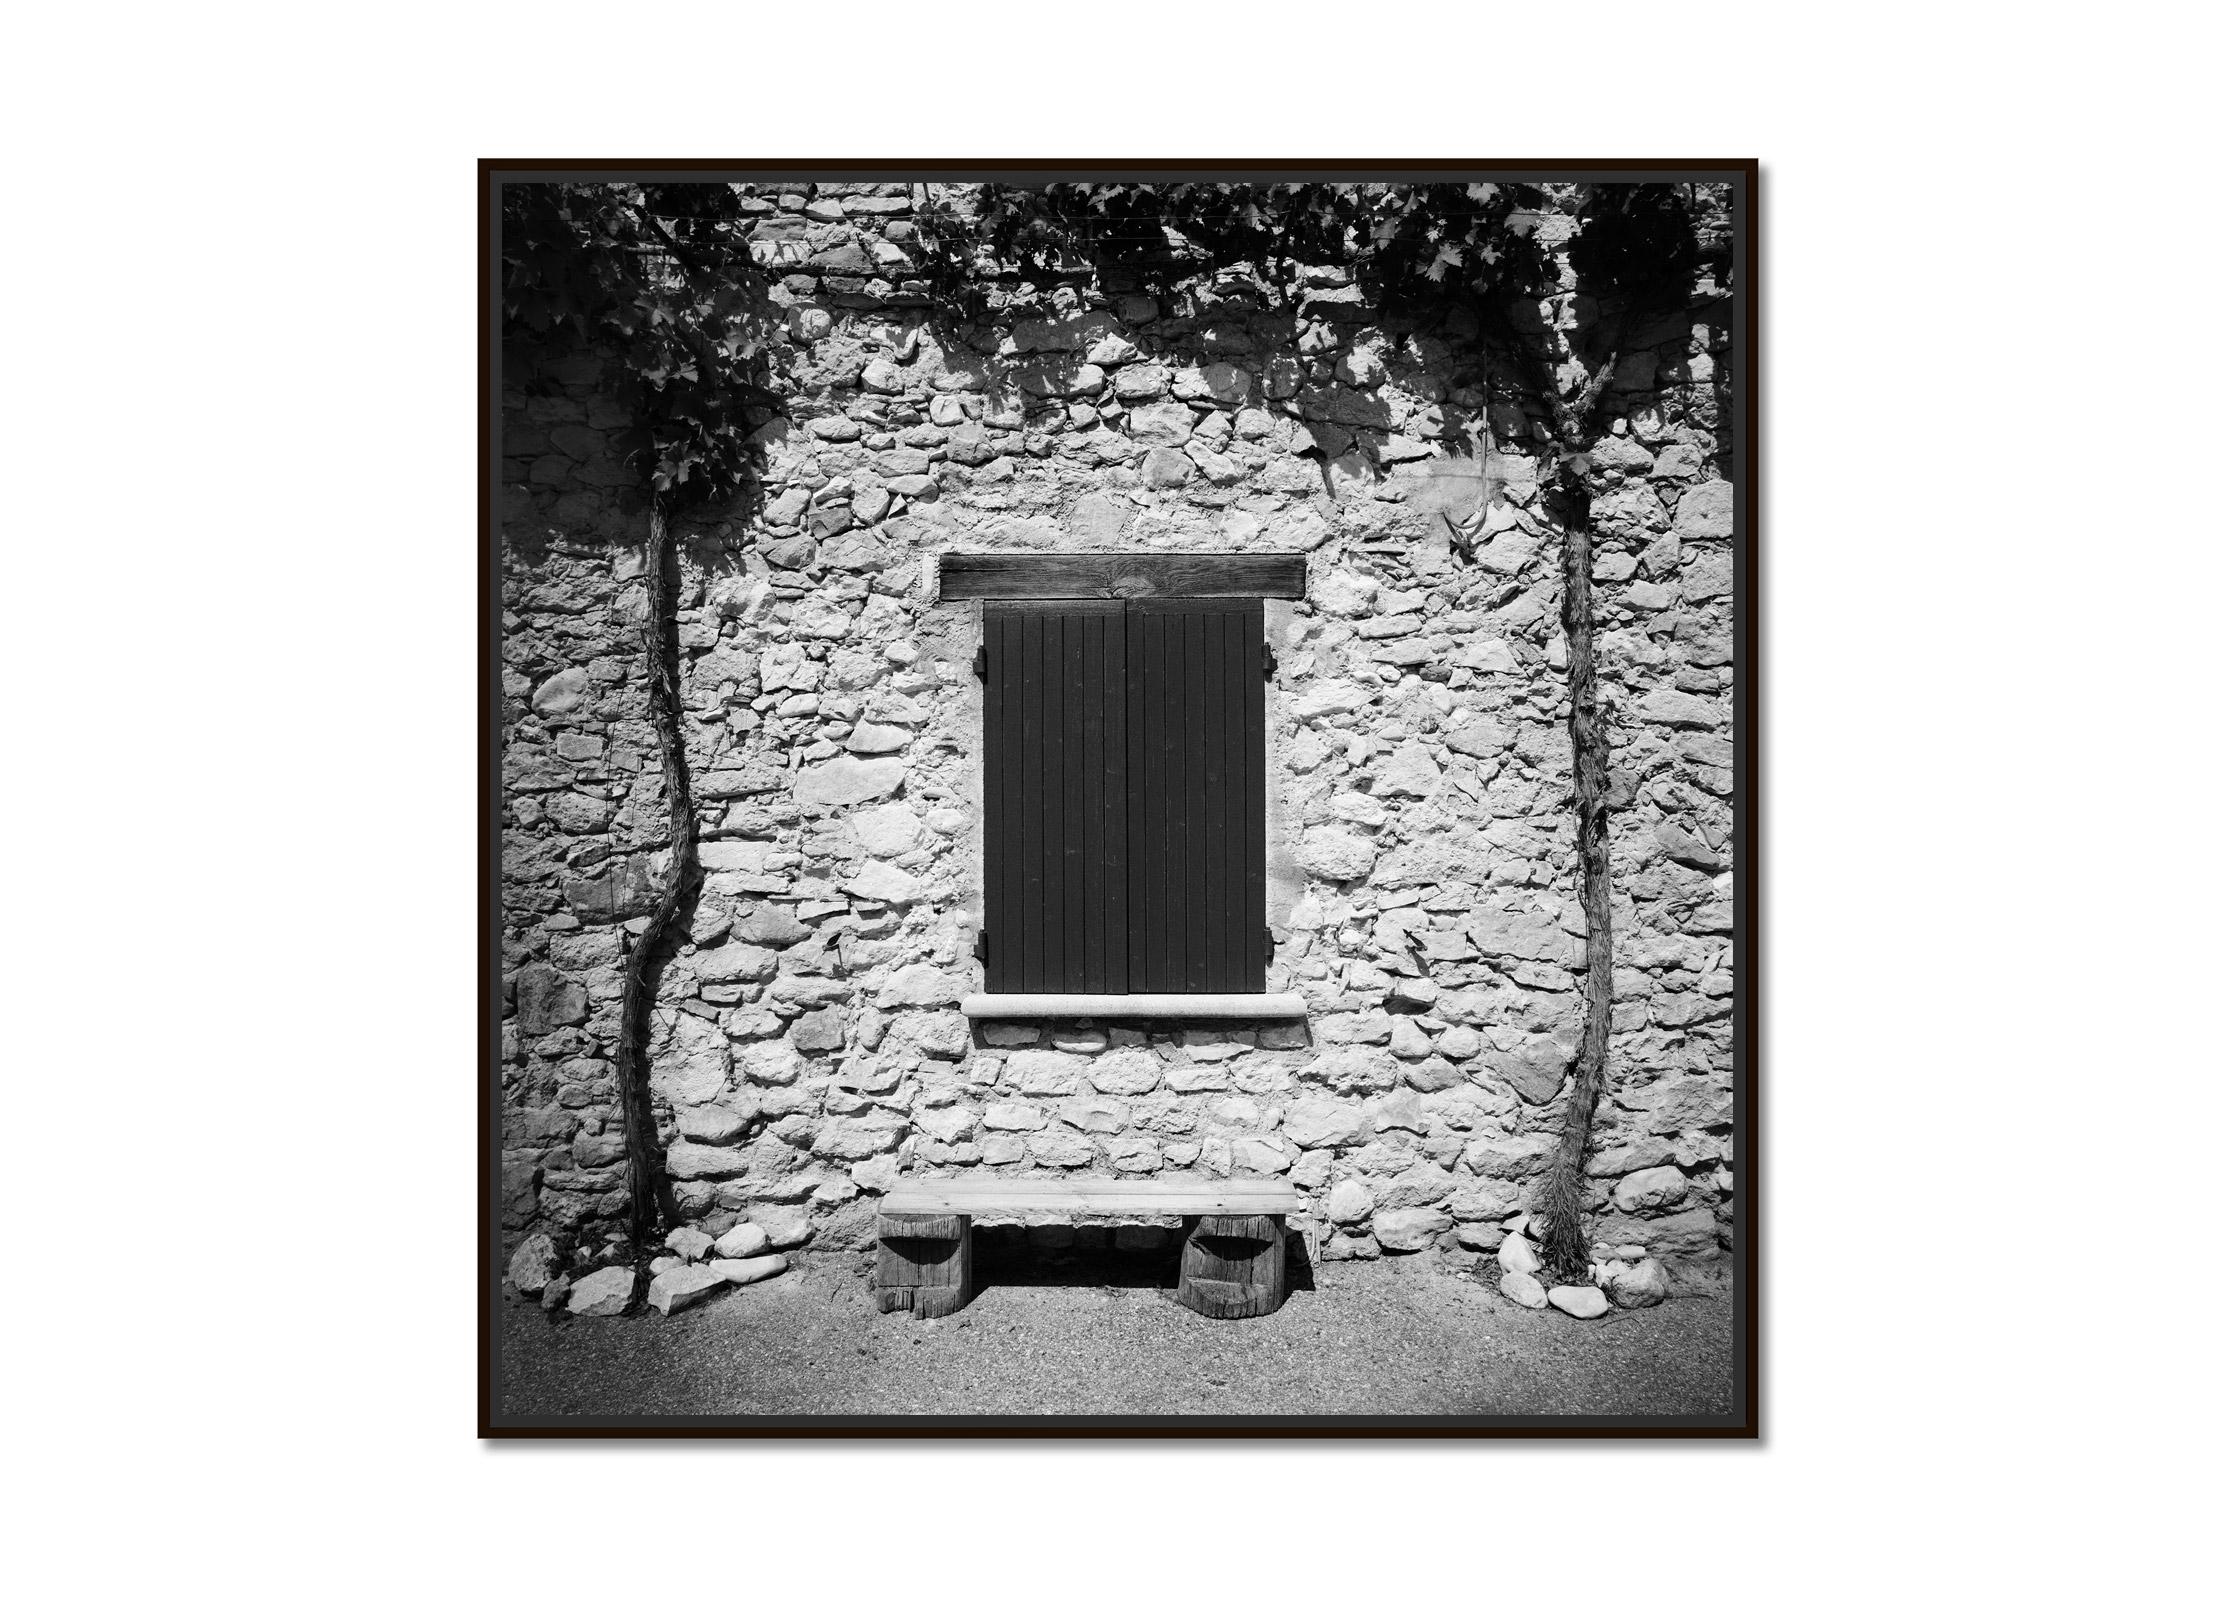 Omas Bench, stone House, France, black and white landscape, fine art photography - Photograph by Gerald Berghammer